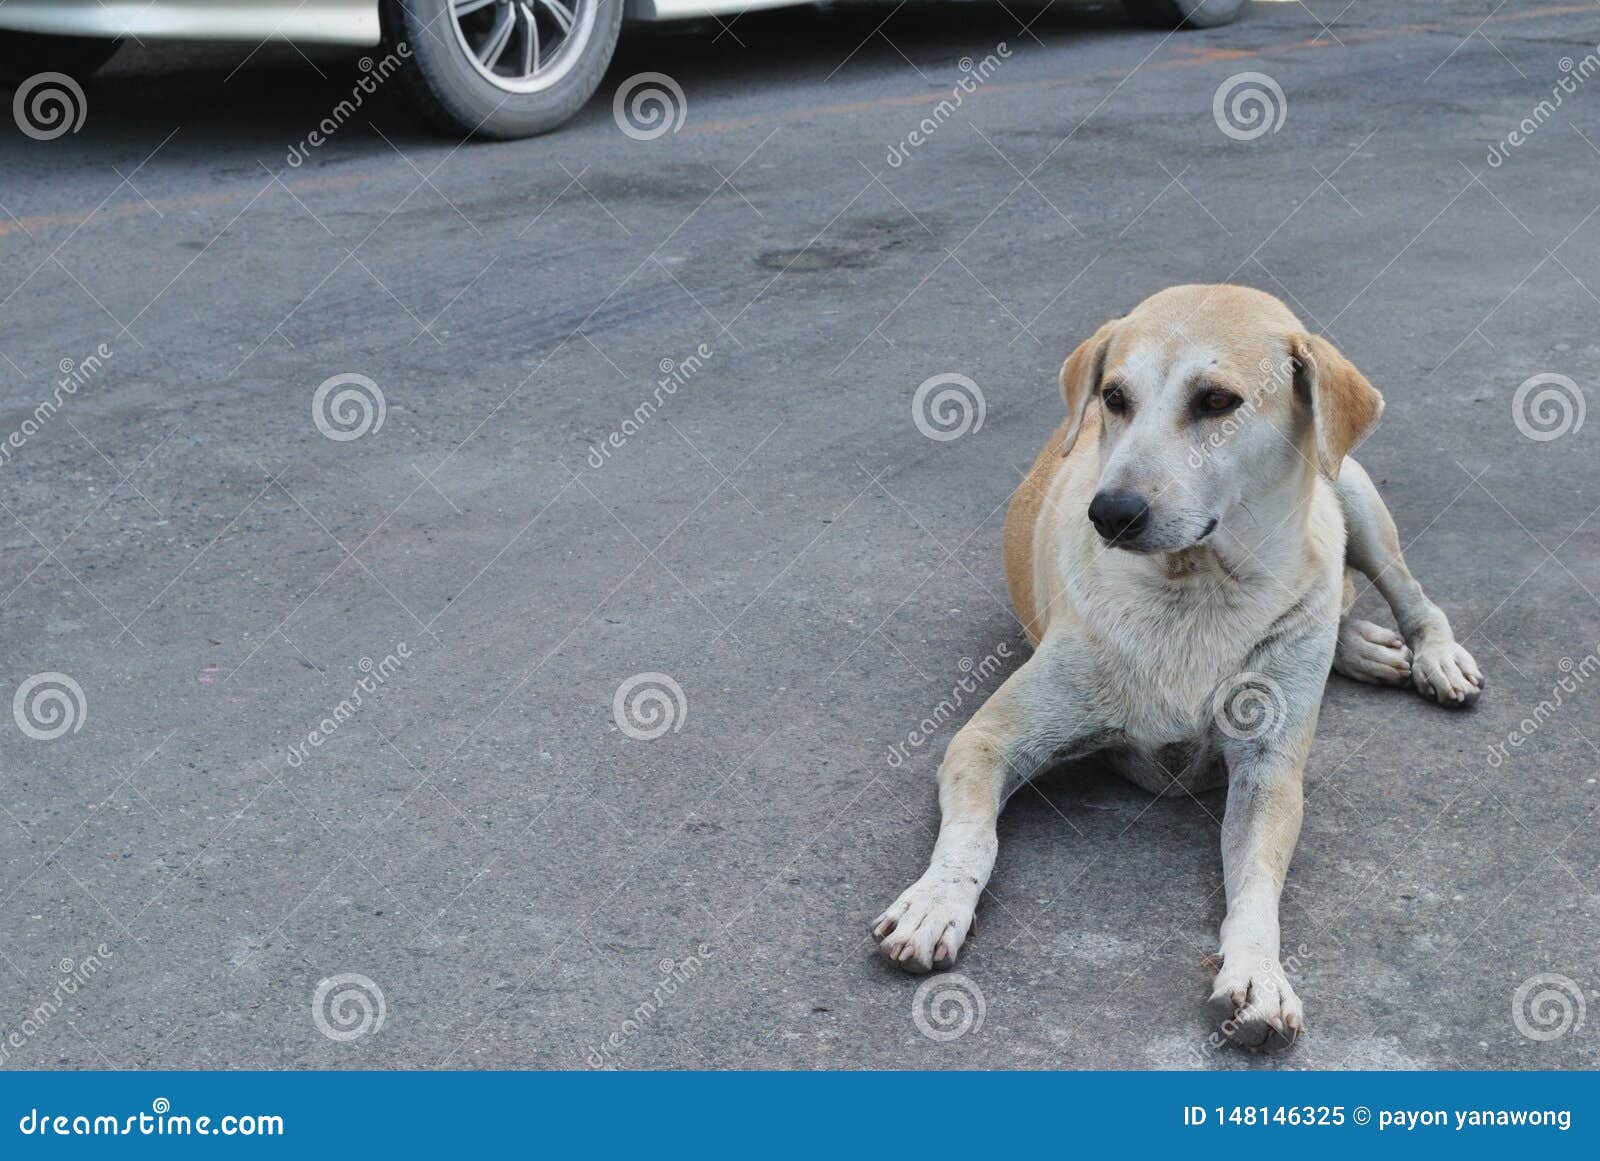 The Dog Lay Flat On The Floor Stock Image Image of cheerful, head 148146325